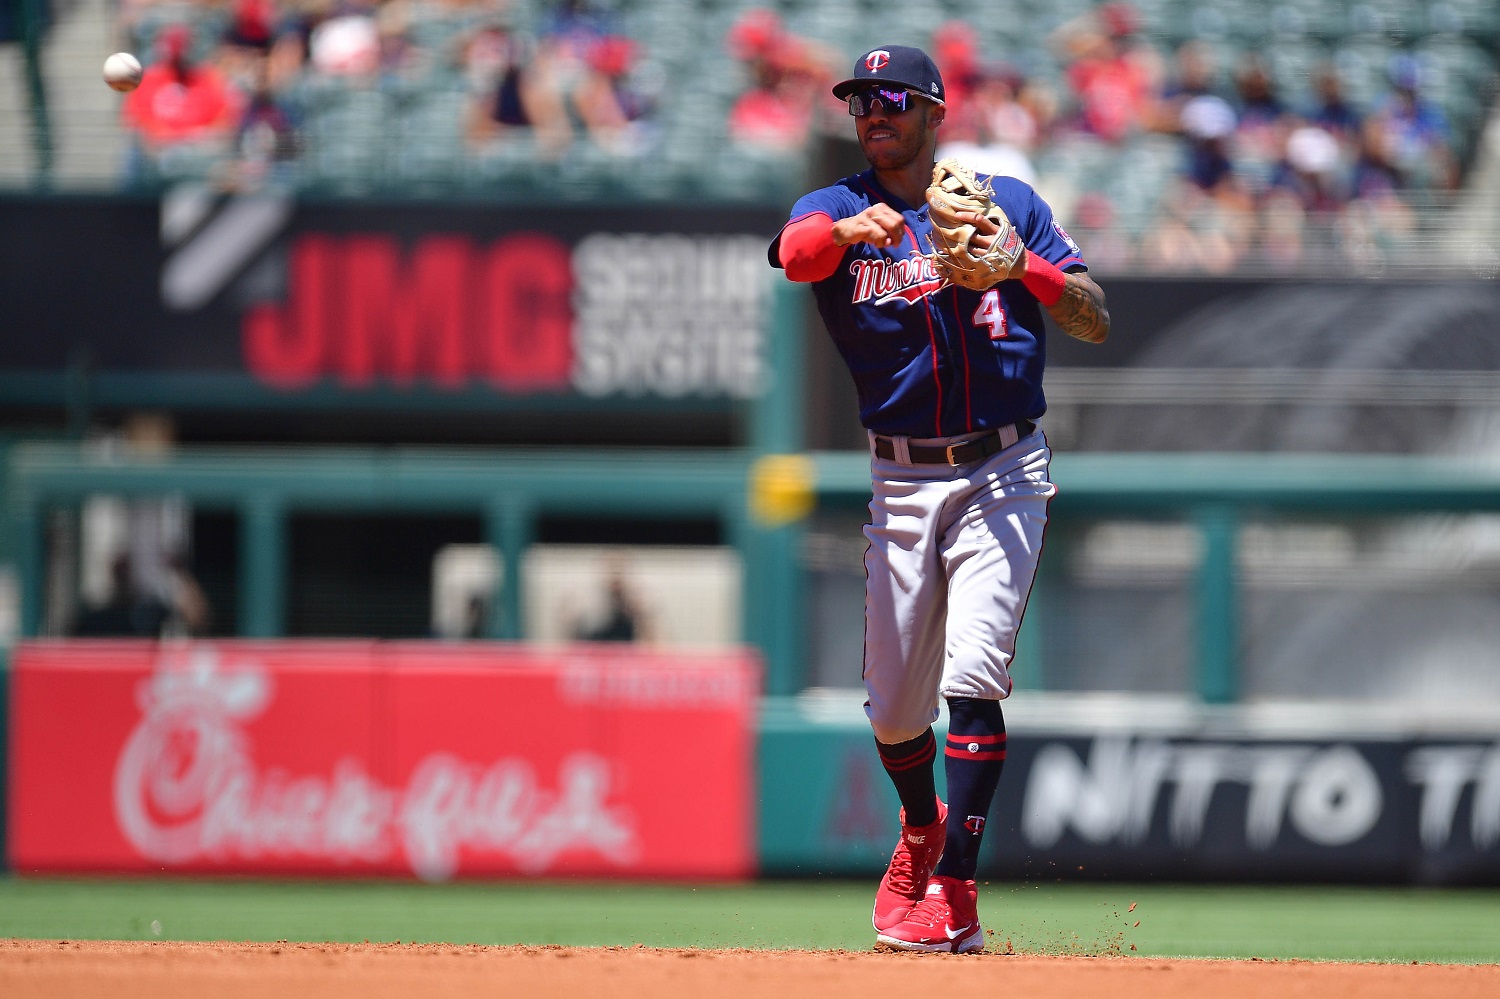 Braves rumors: Could Elvis Andrus be a fit at SS for the Atlanta Braves?